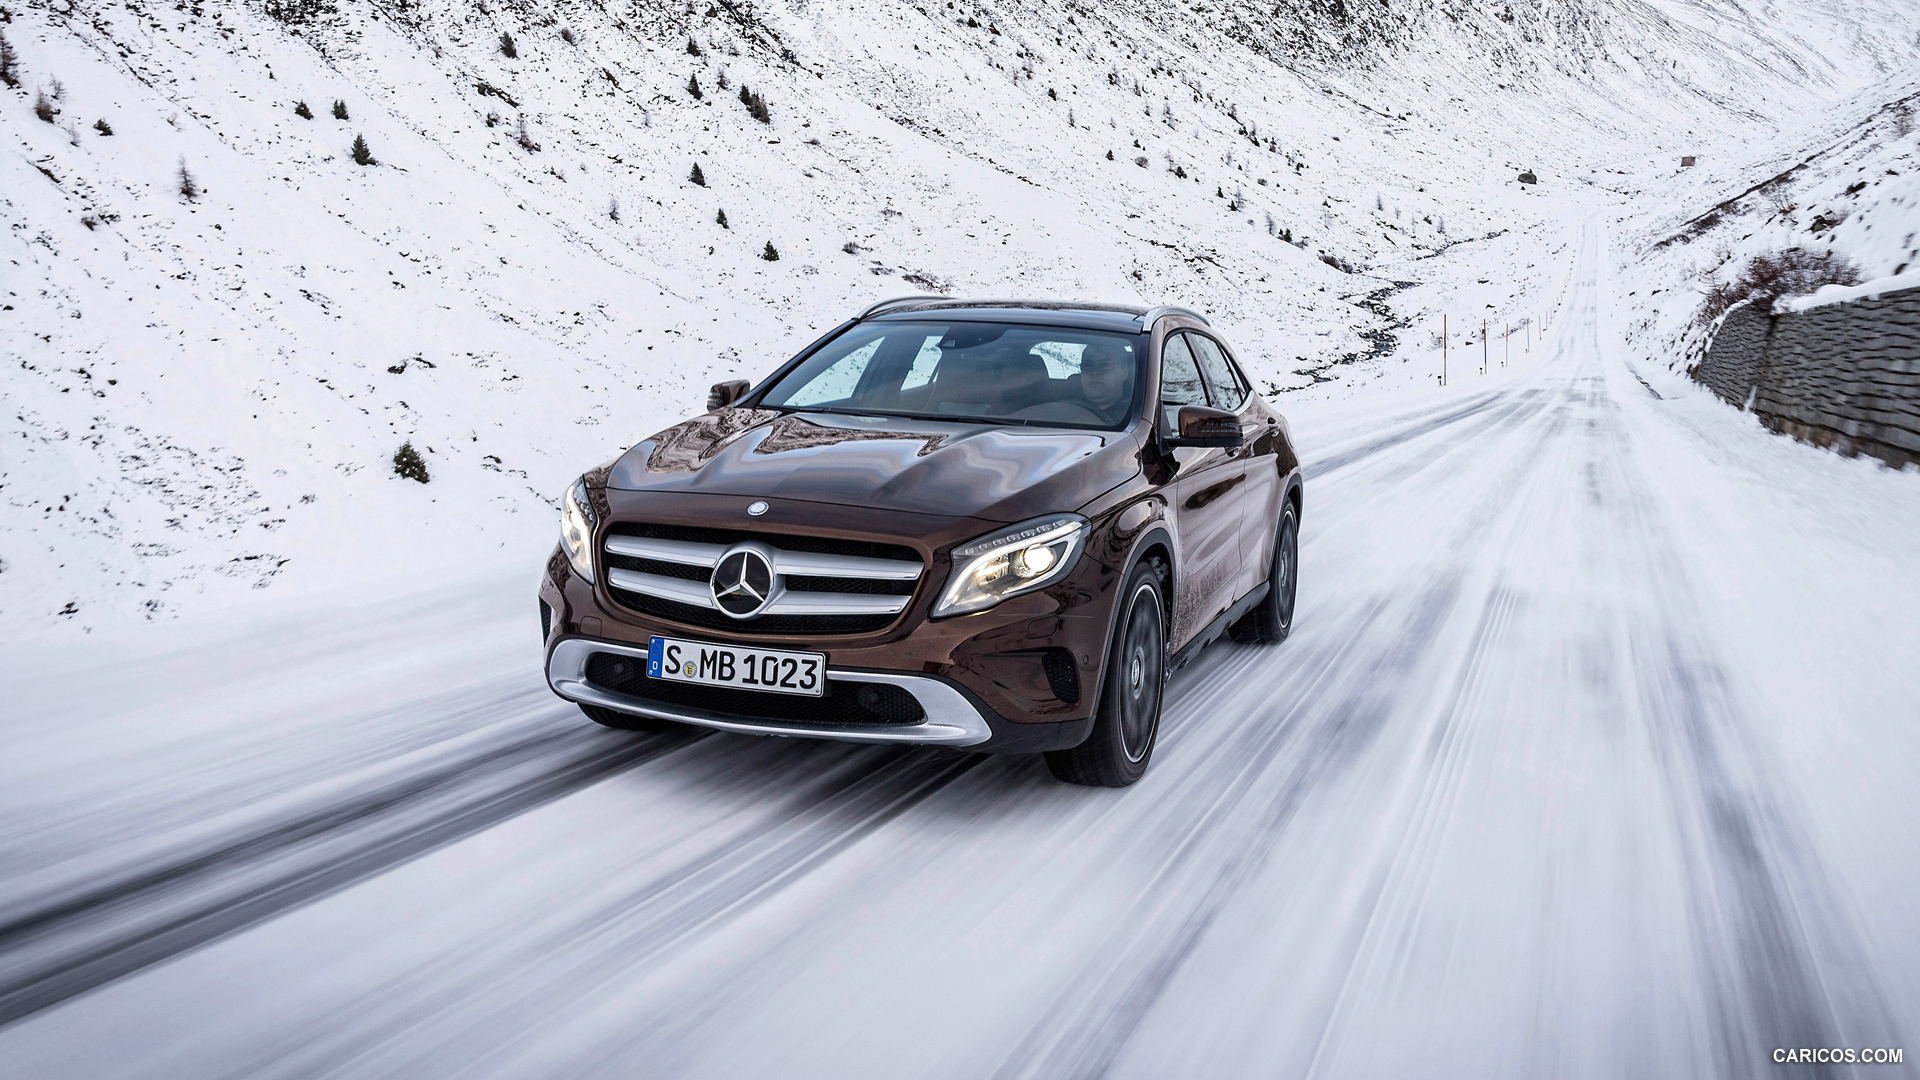 2015 Mercedes-Benz GLA 220 CDI 4MATIC - In Snow - Front, #64 of 71